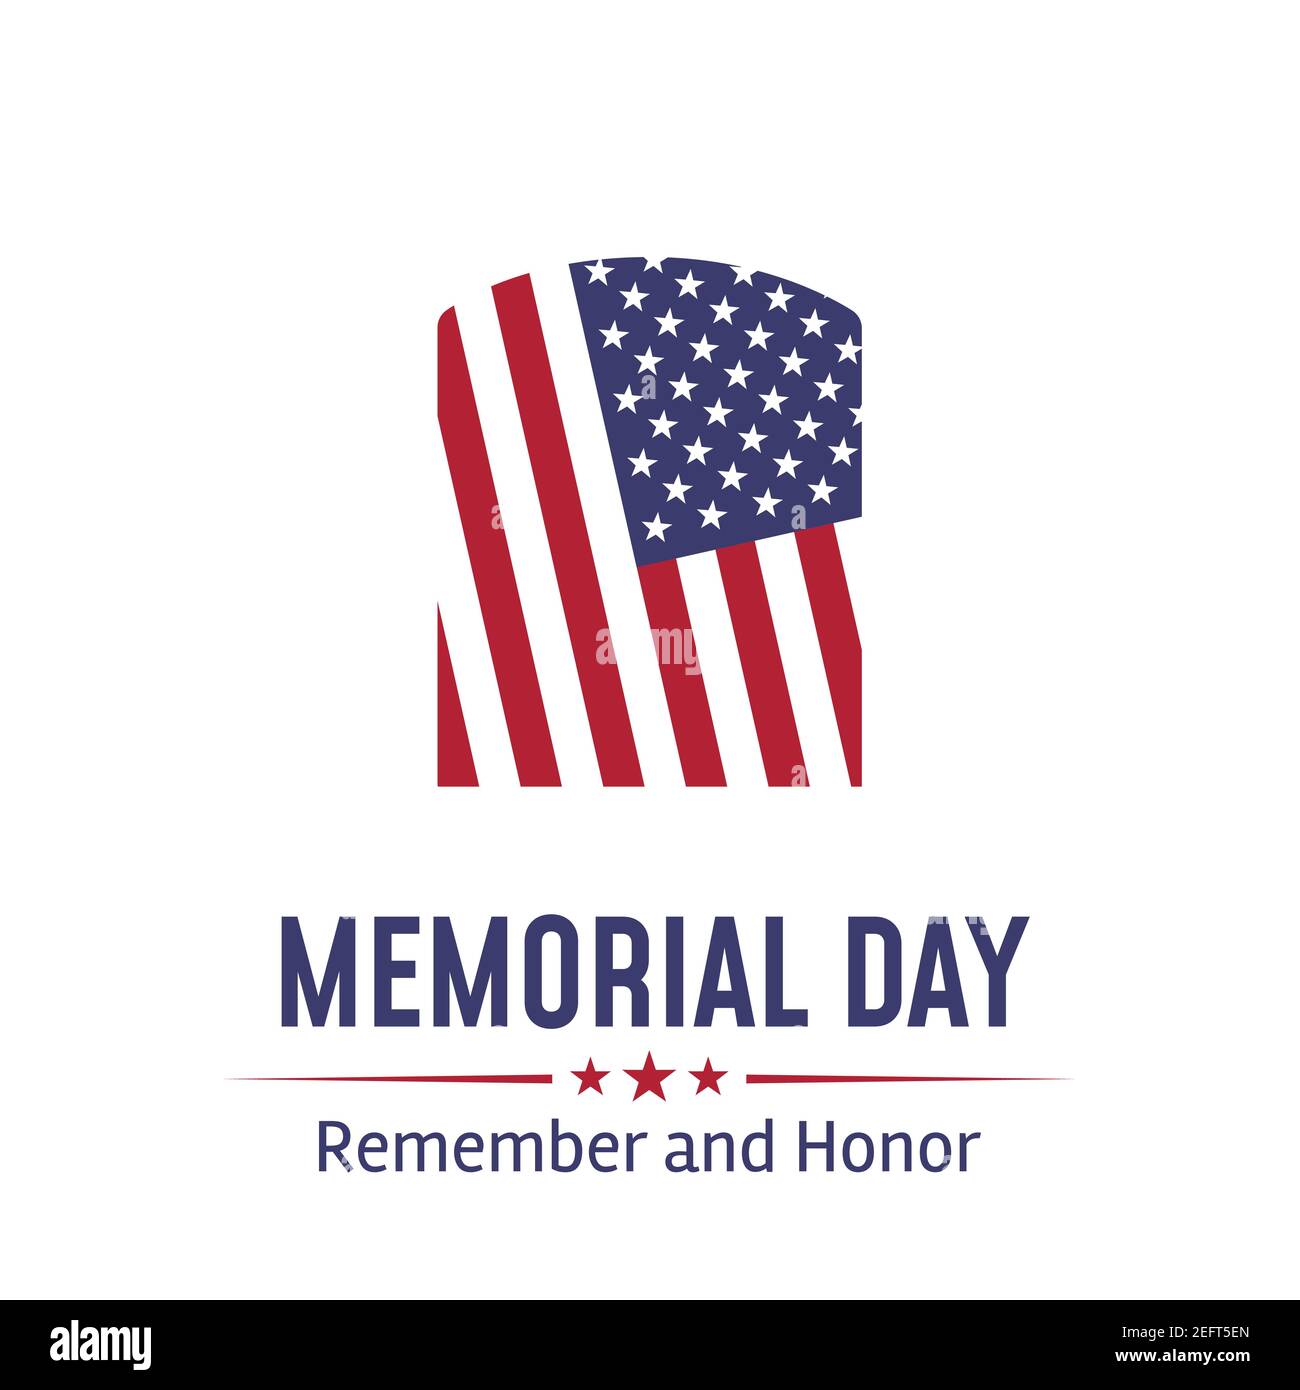 Memorial Day in USA with lettering remember and honor. Holiday of memory and honor of soldiers, military personnel who died while serving in the Unite Stock Vector